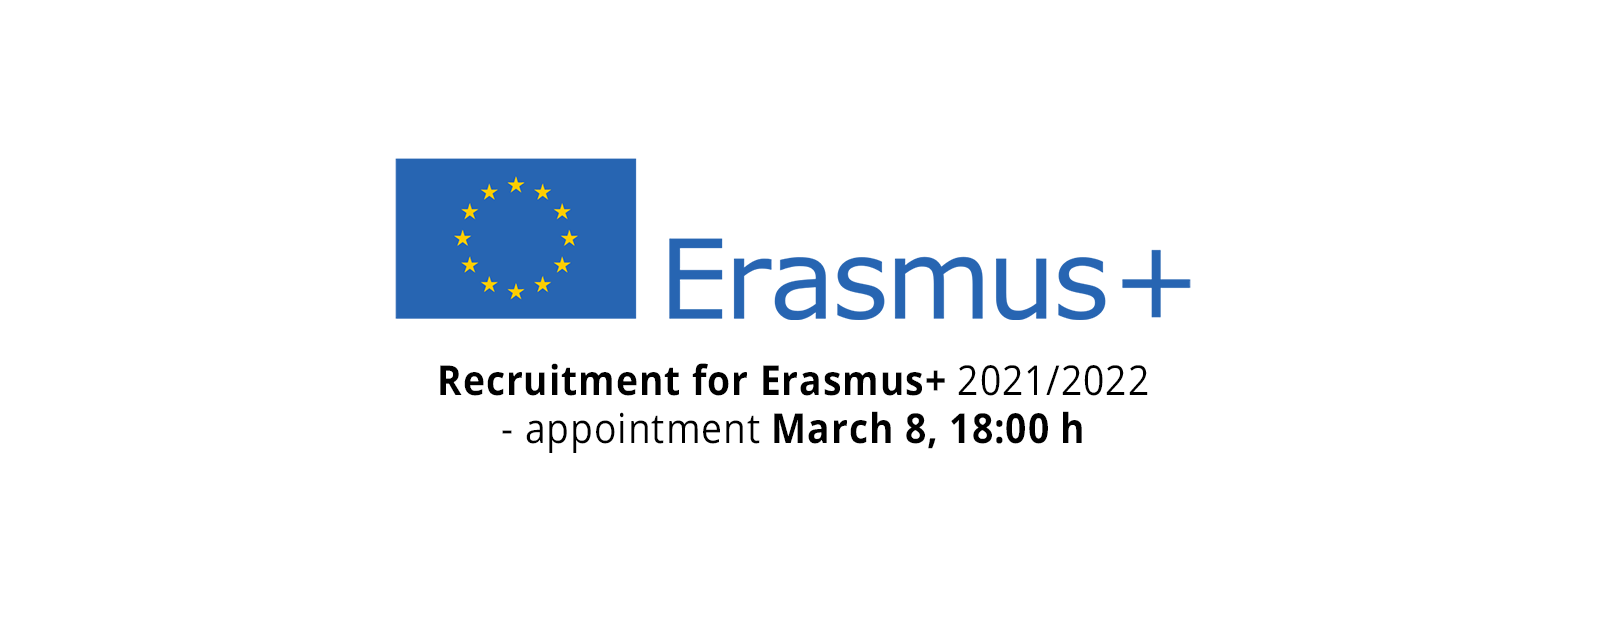 Recruitment for Erasmus+. Appointment March 8, 18:00 h